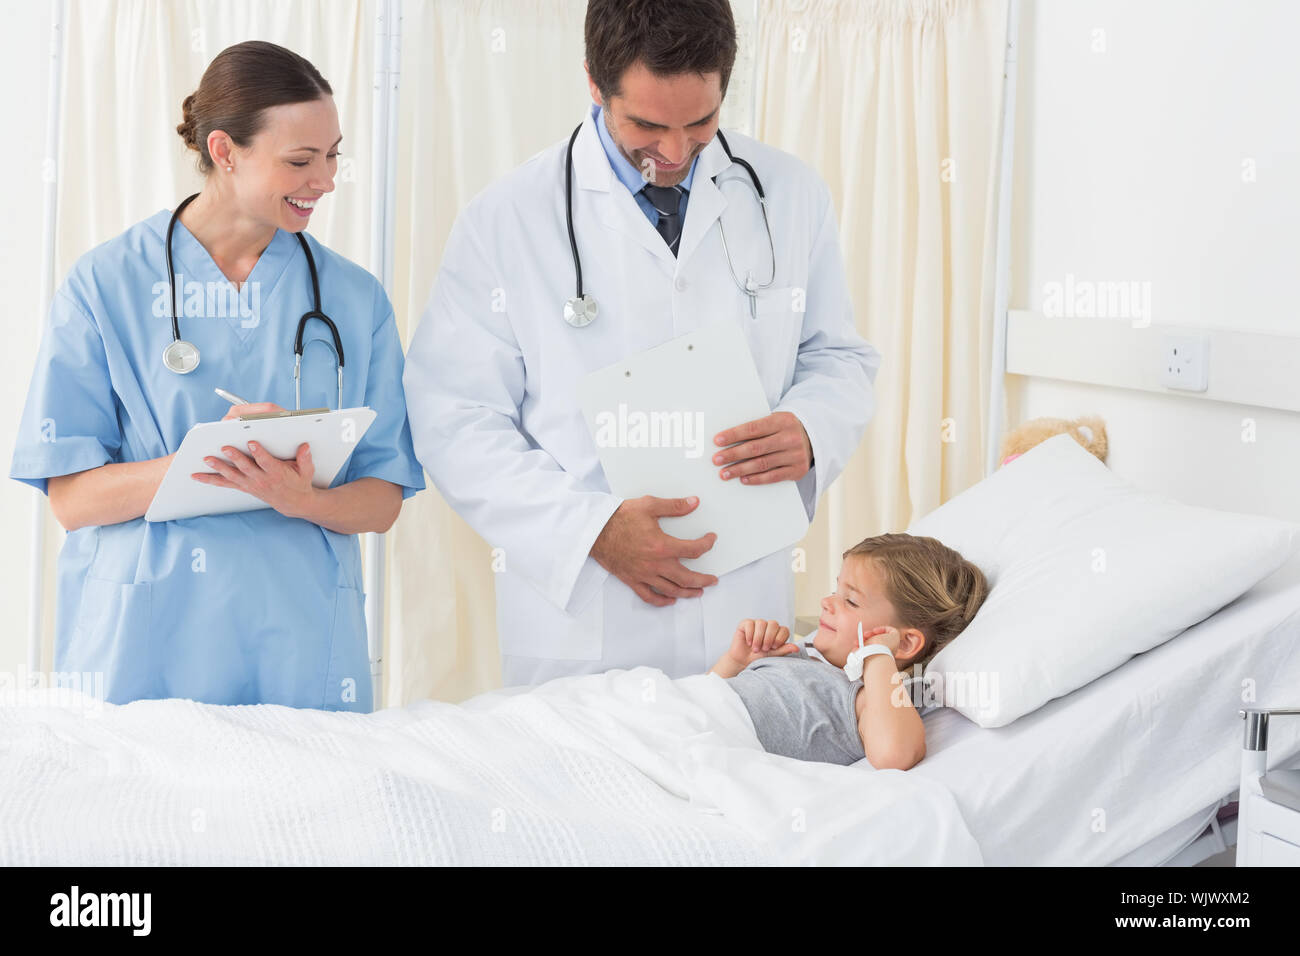 Smiling doctors attending sick girl lying in hospital bed Stock Photo